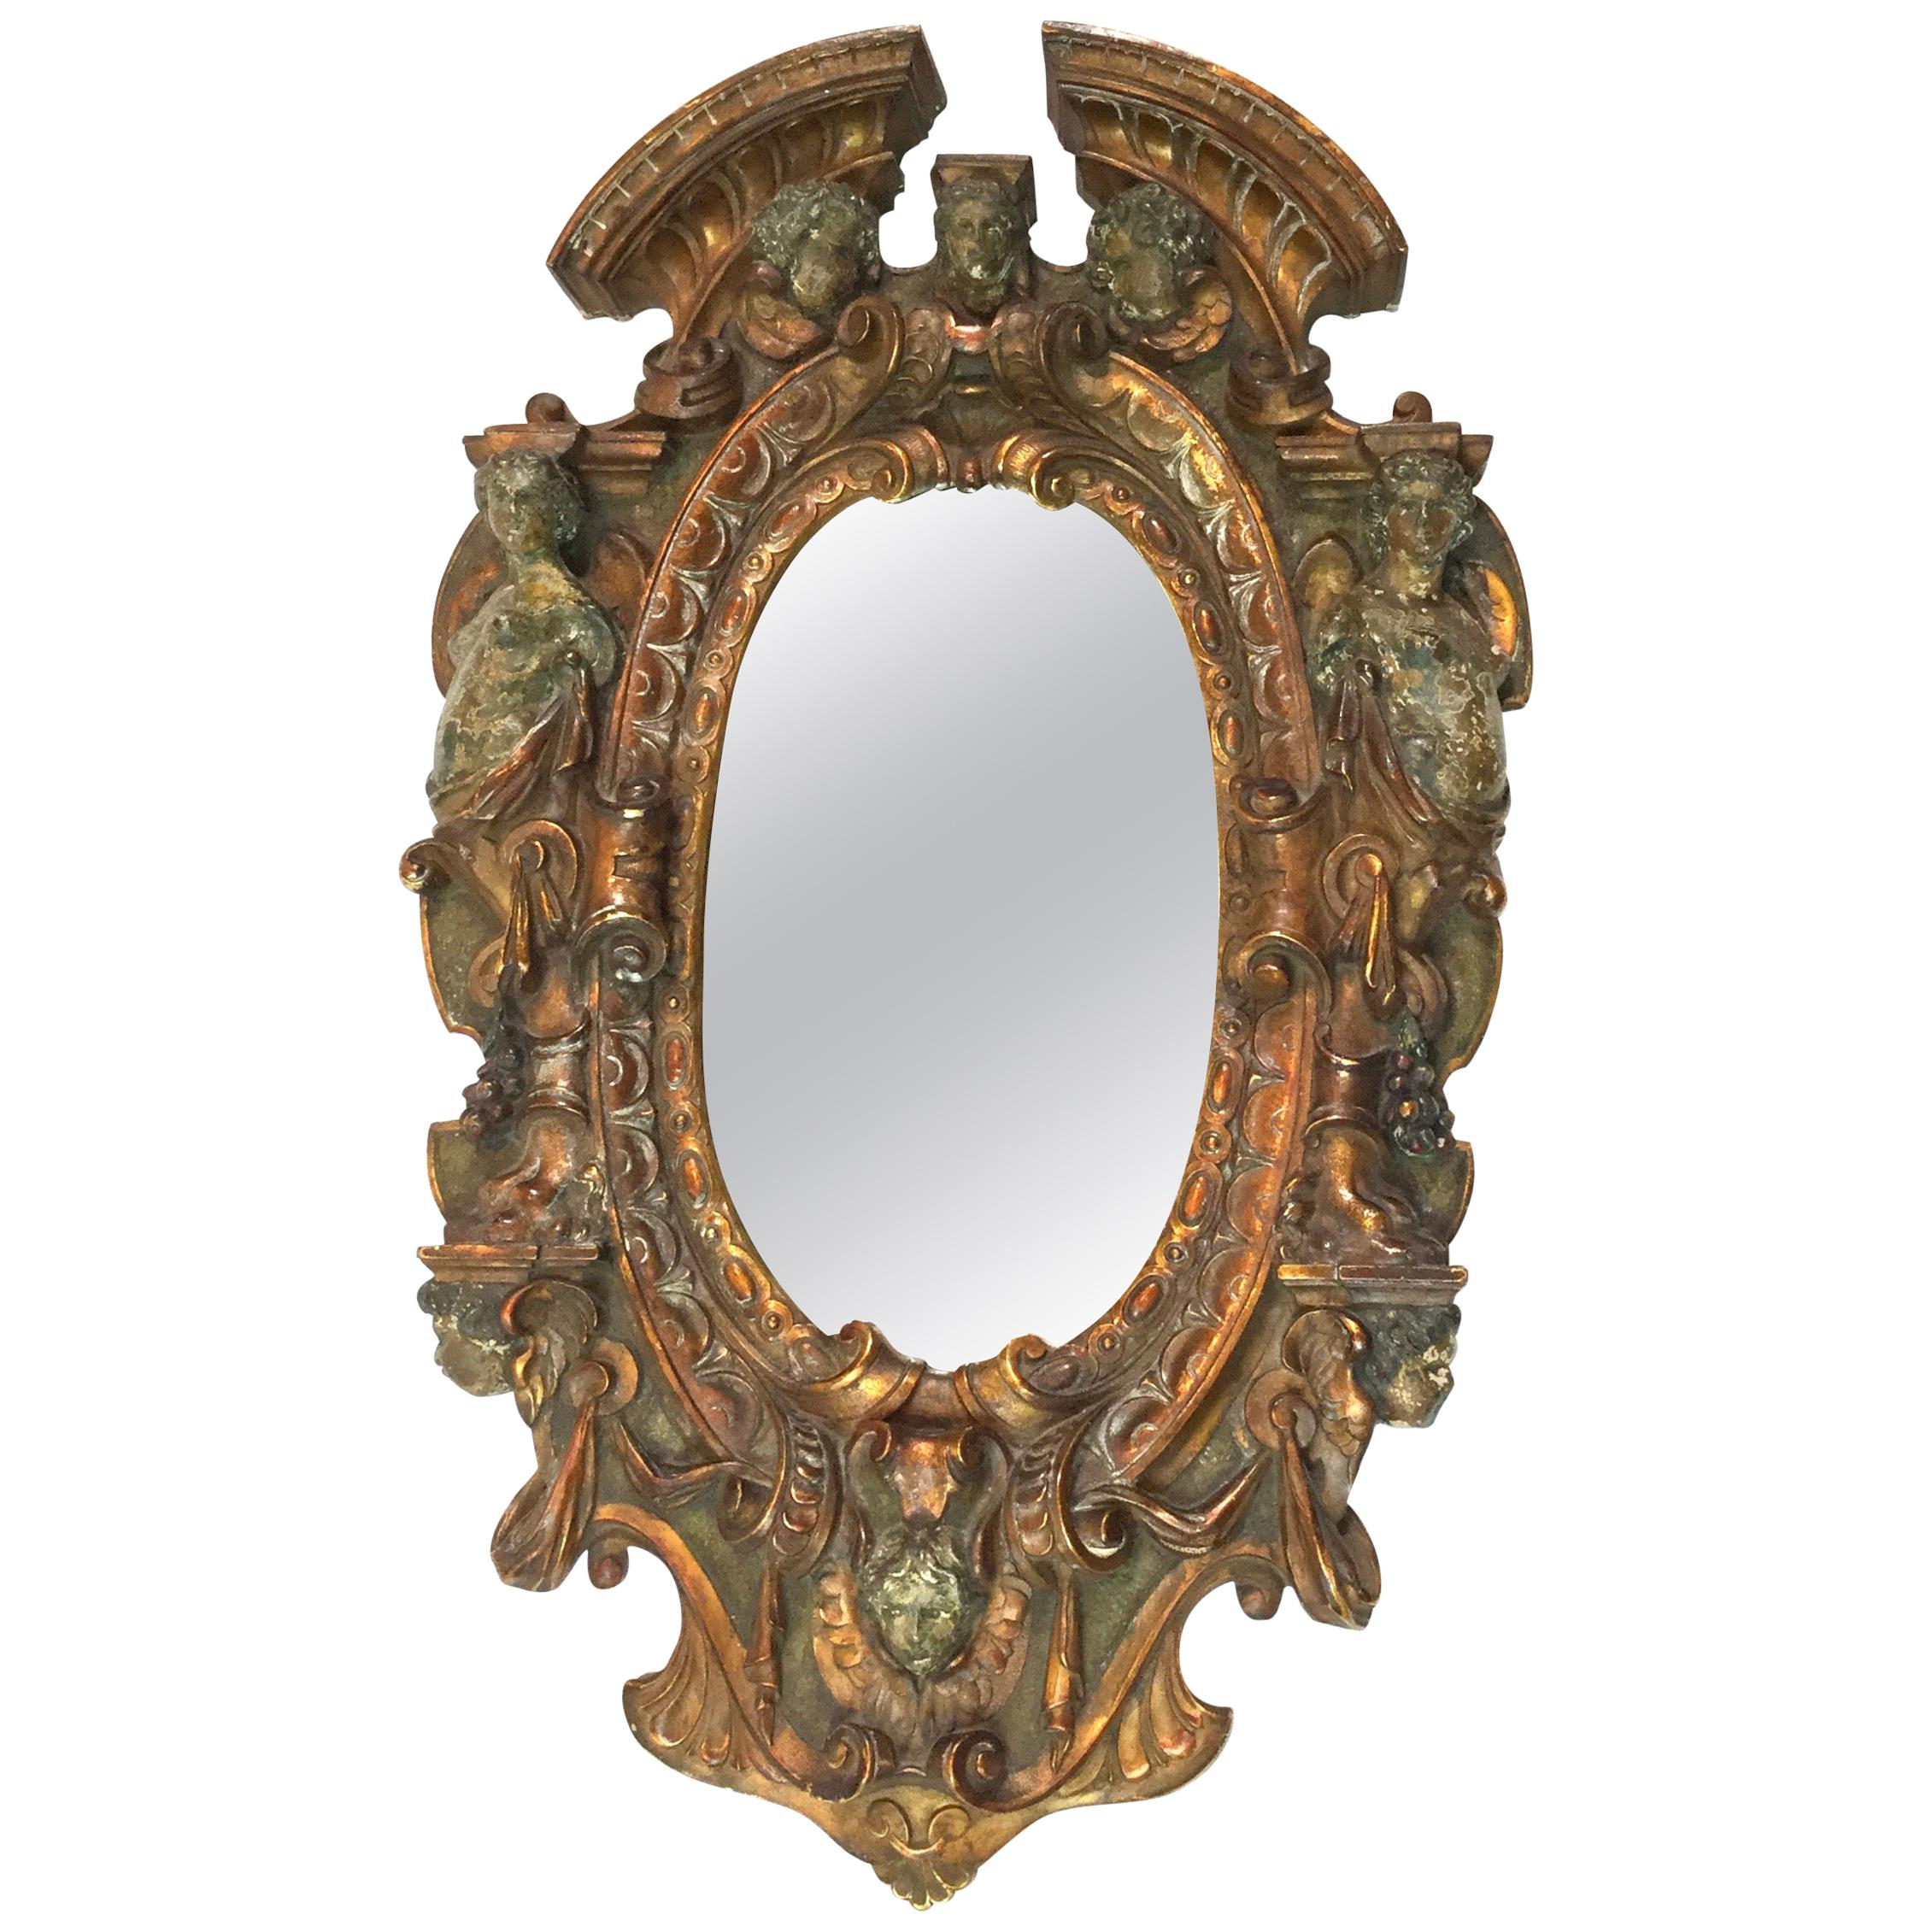 17th-18th Century Mixed Metal Italian Renaissance Mirror, Made in Tuscan Italy For Sale